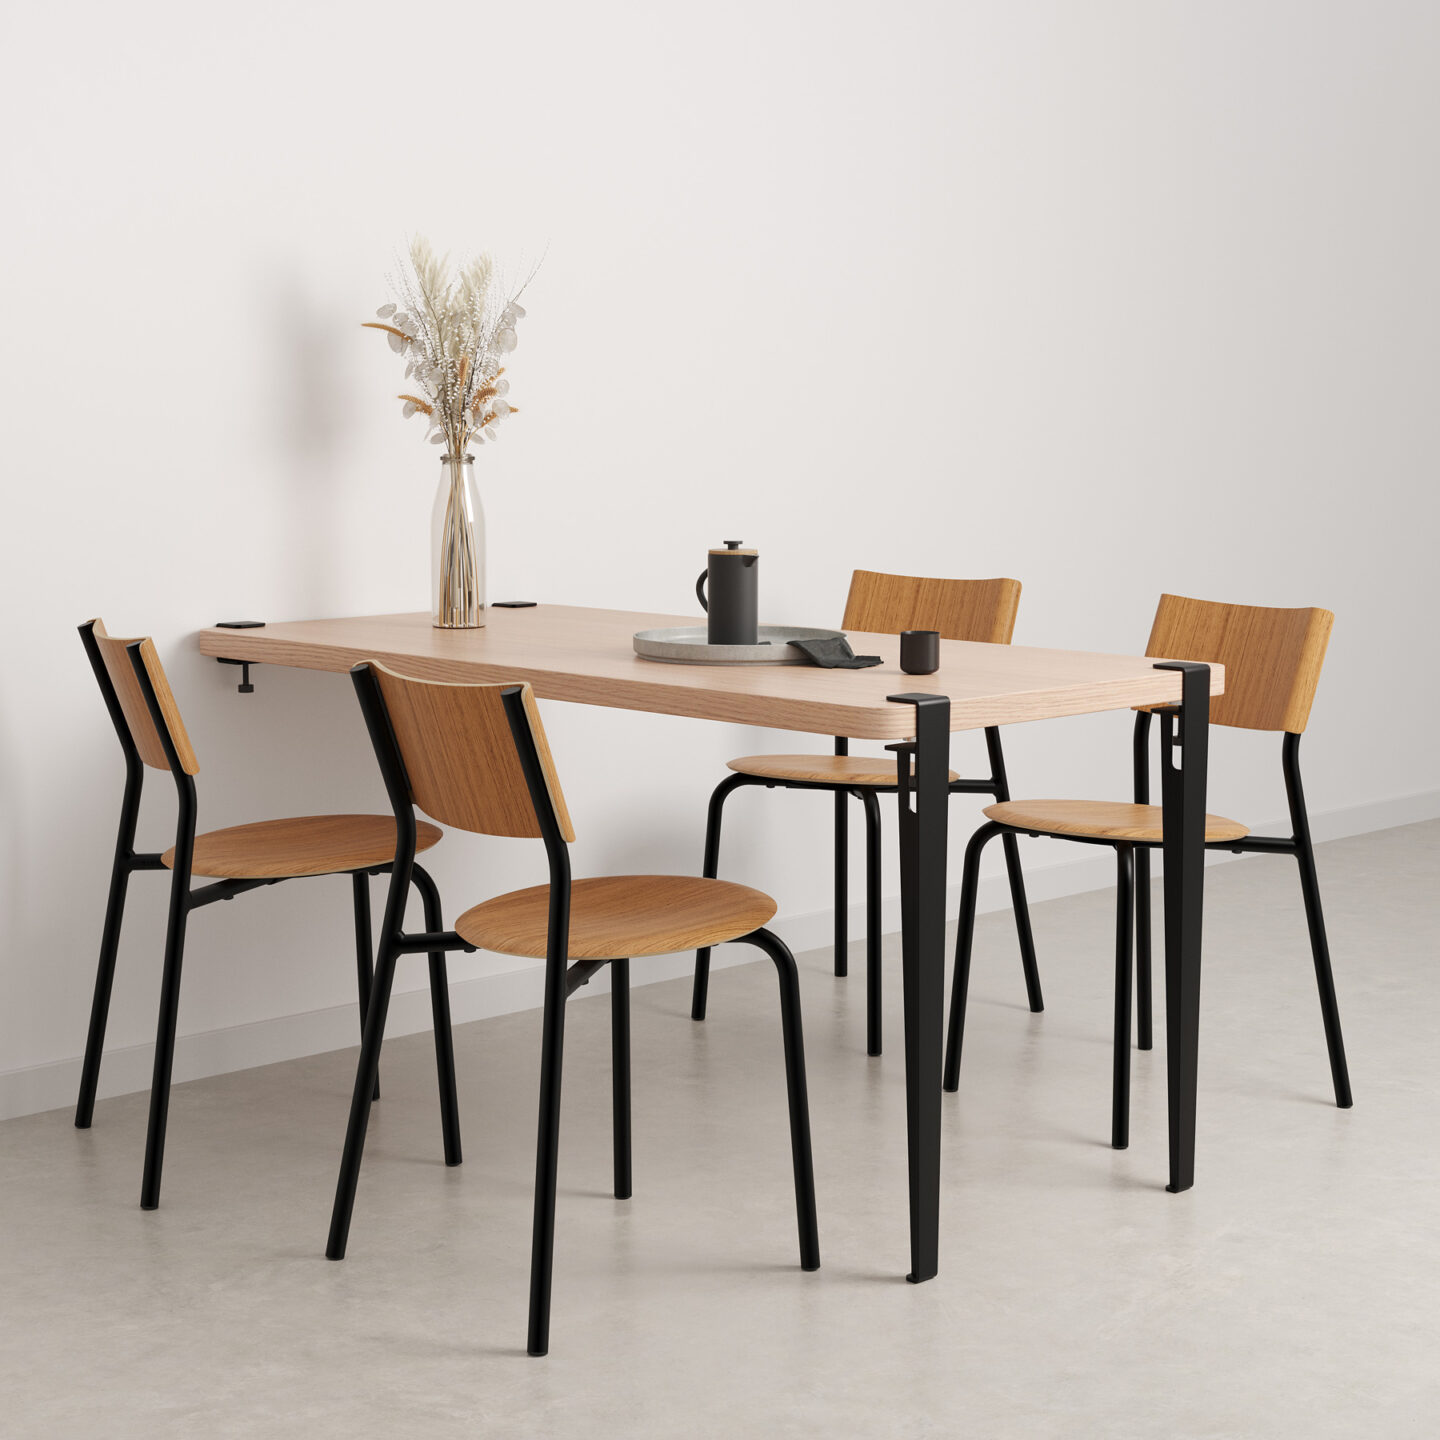 Wall-mounted dining table - Sustainable design - 100% made in Europe